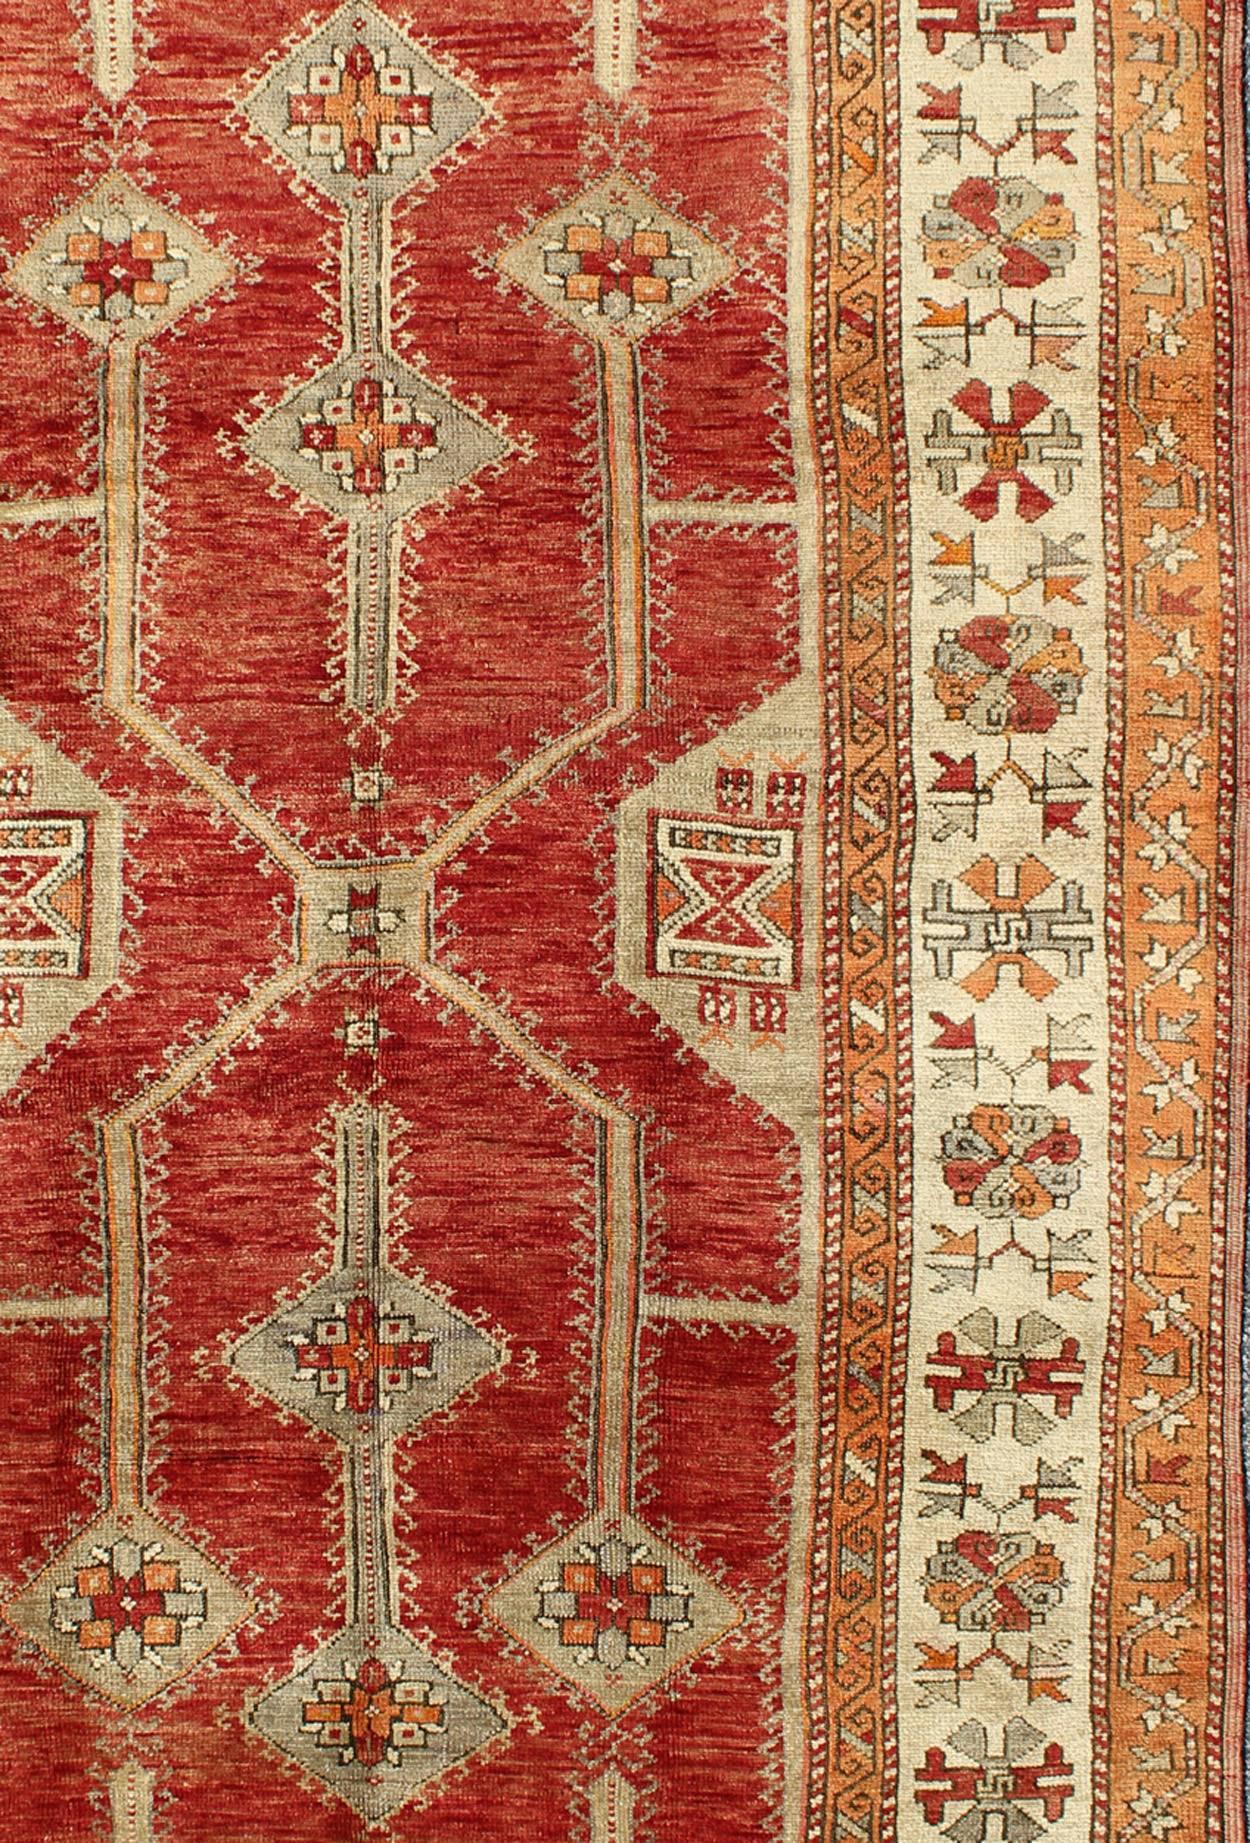 20th Century Antique Turkish Oushak Rug With Geometric Design in Red, Light Green & L. Orange For Sale